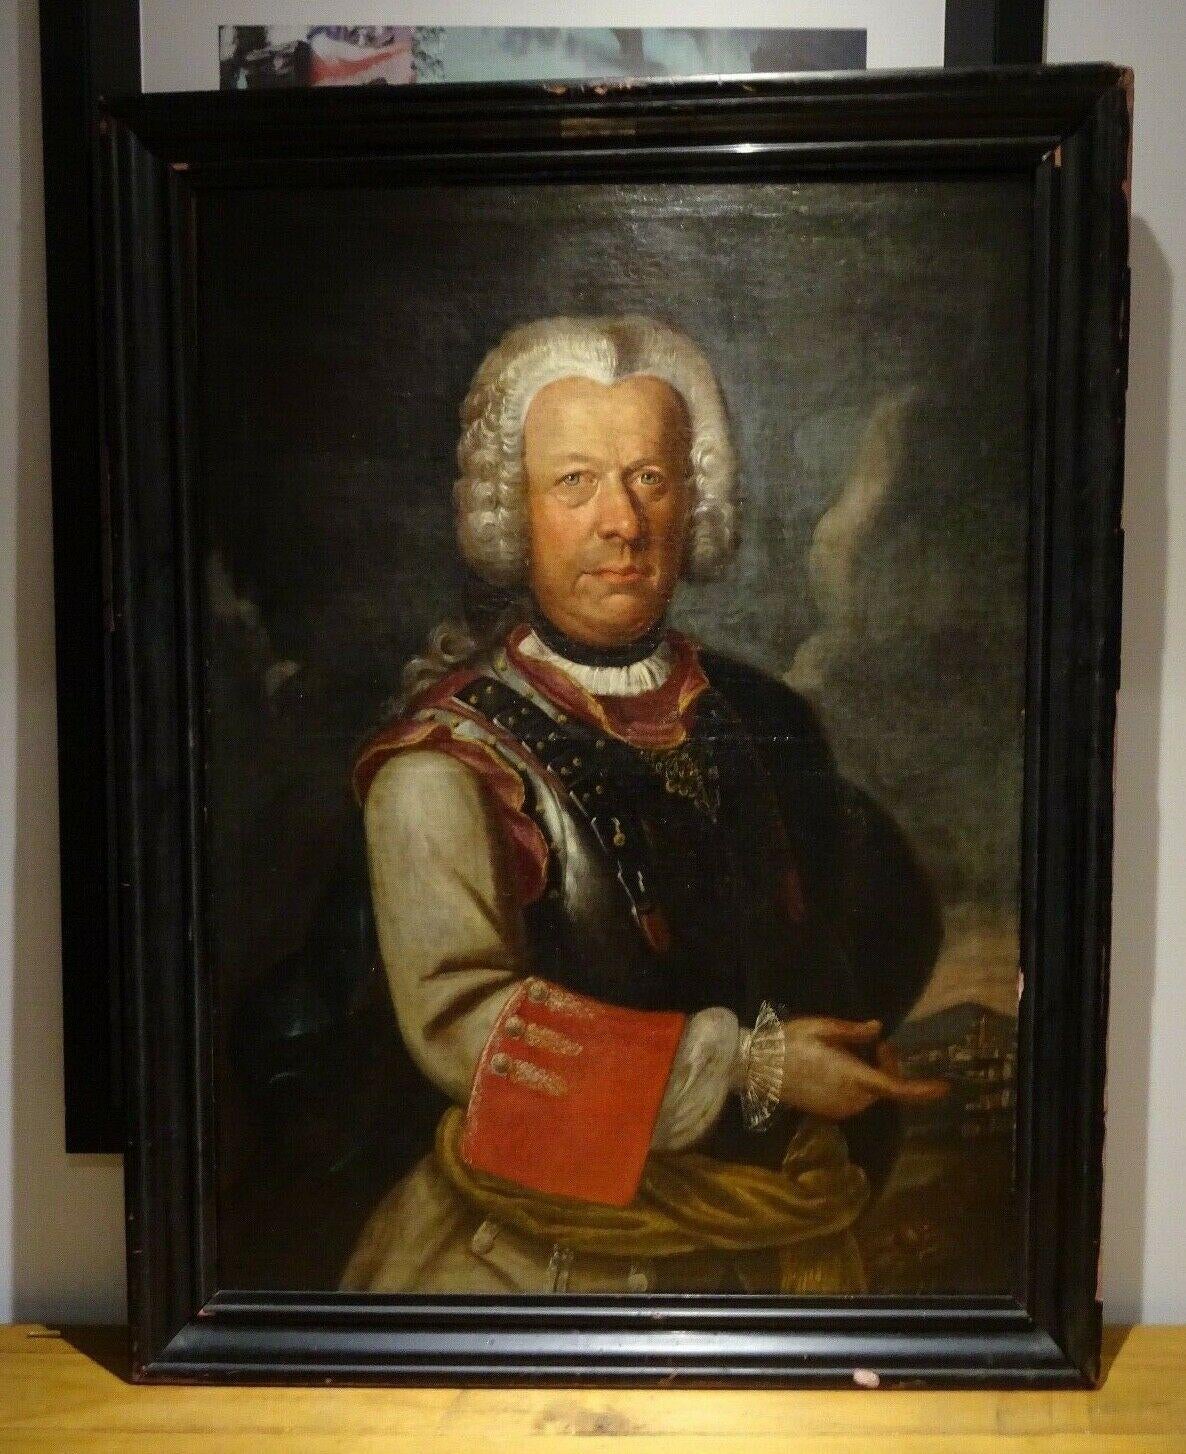 Portrait Of A Piedmont Nobleman & Military Officer, House Of Savoy, early 18th c - Painting by Unknown